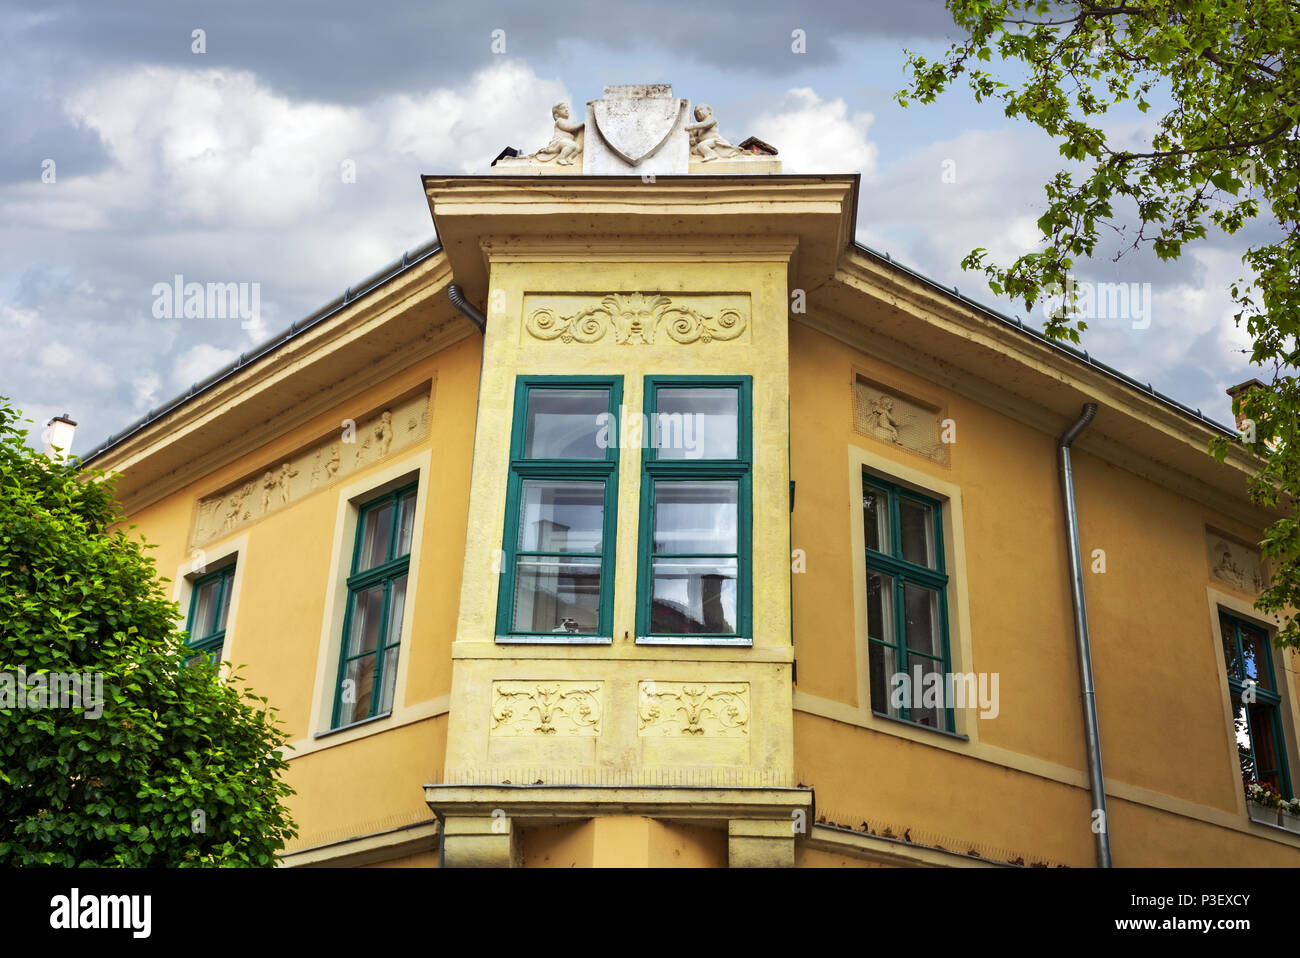 Windowed balcony of a typical old corner house in Székesfehérvár,Hungary.Szekesfehervar was the capital of Hungary in the Middle Ages. Stock Photo